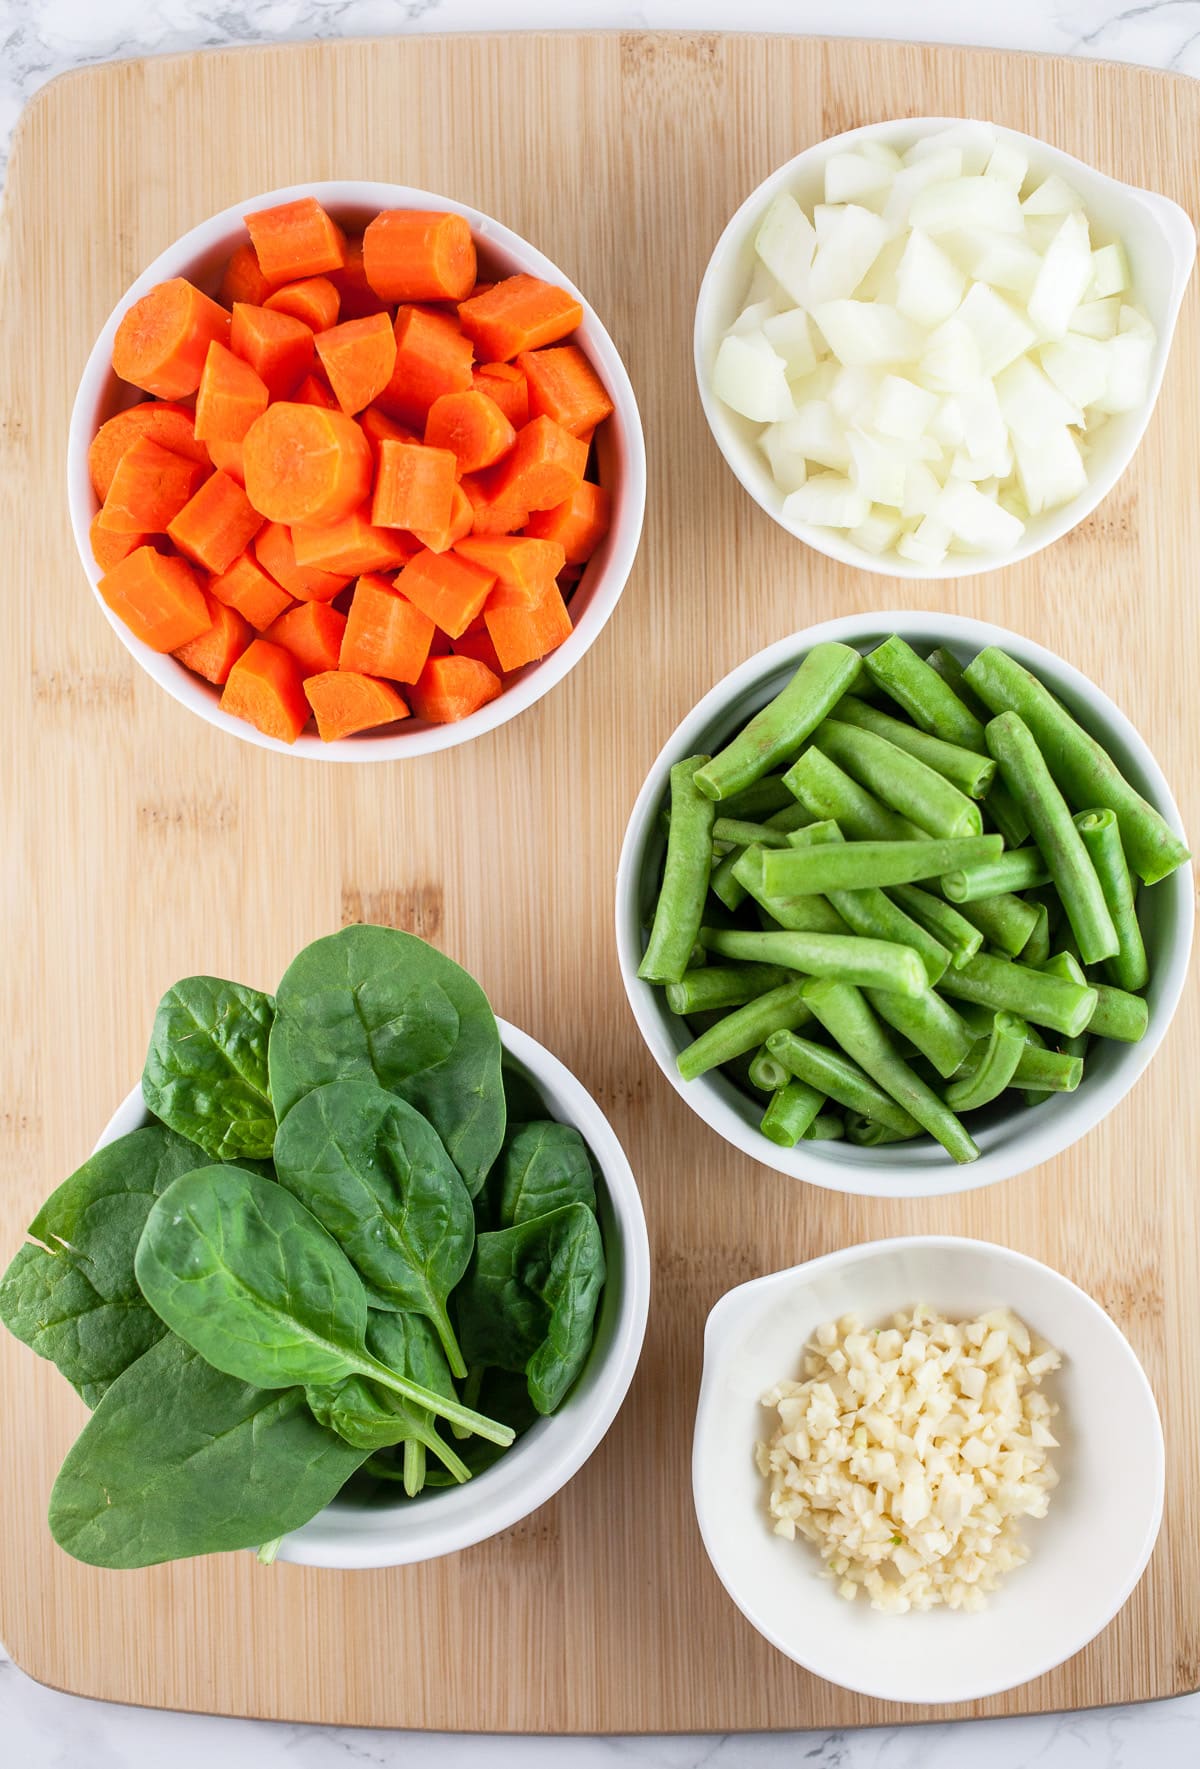 Minced garlic and onions, chopped carrots and green beans, and fresh spinach on wooden cutting board.